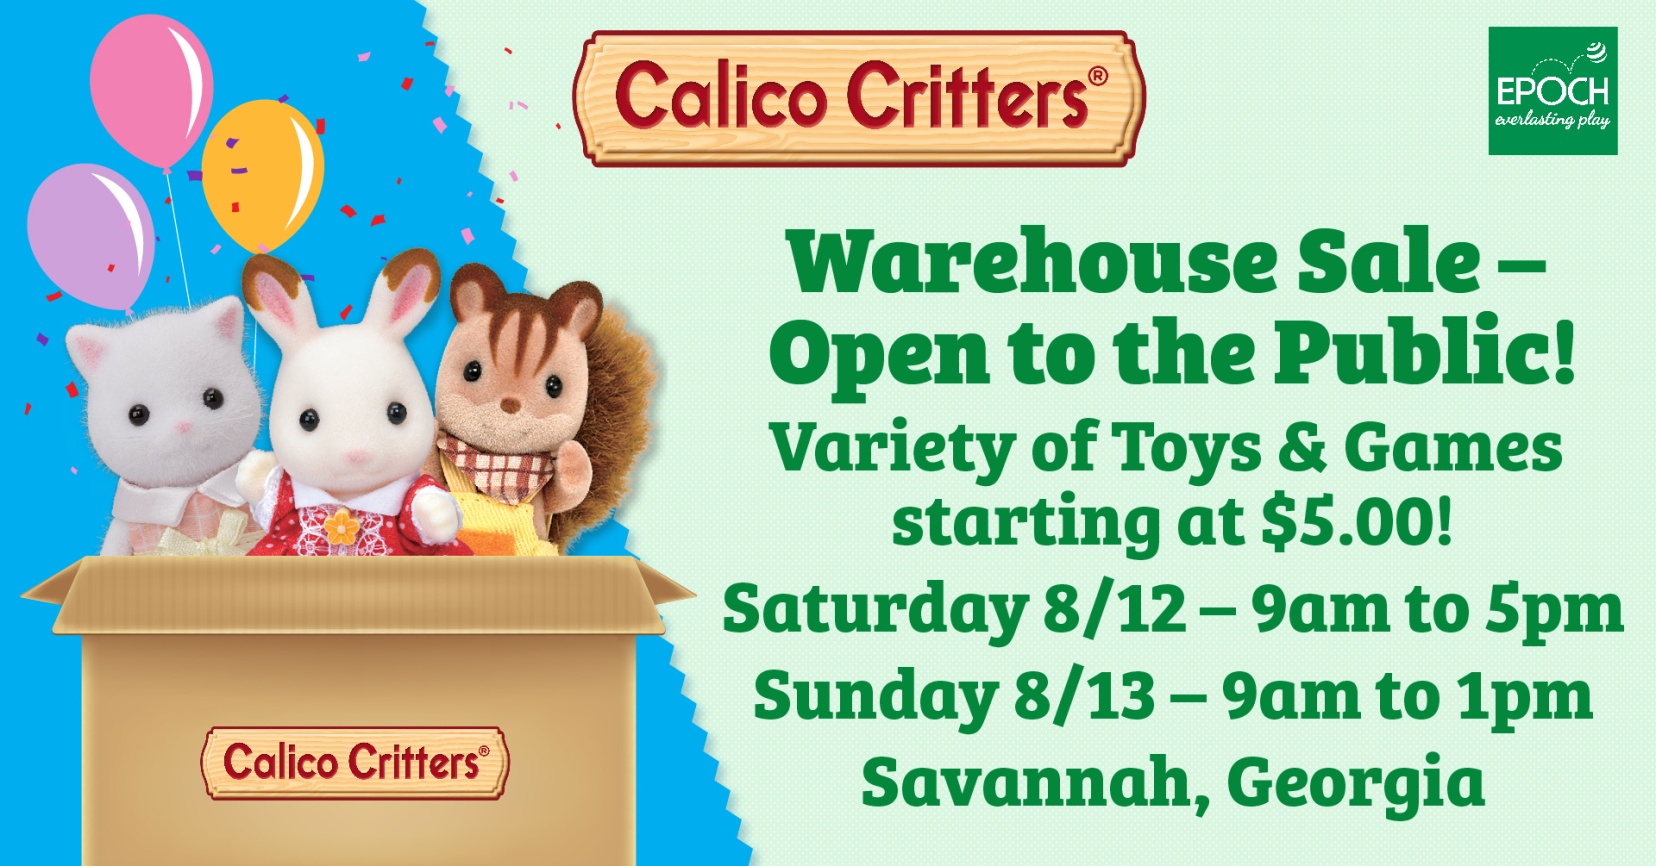 Calico Critters Warehouse Sale